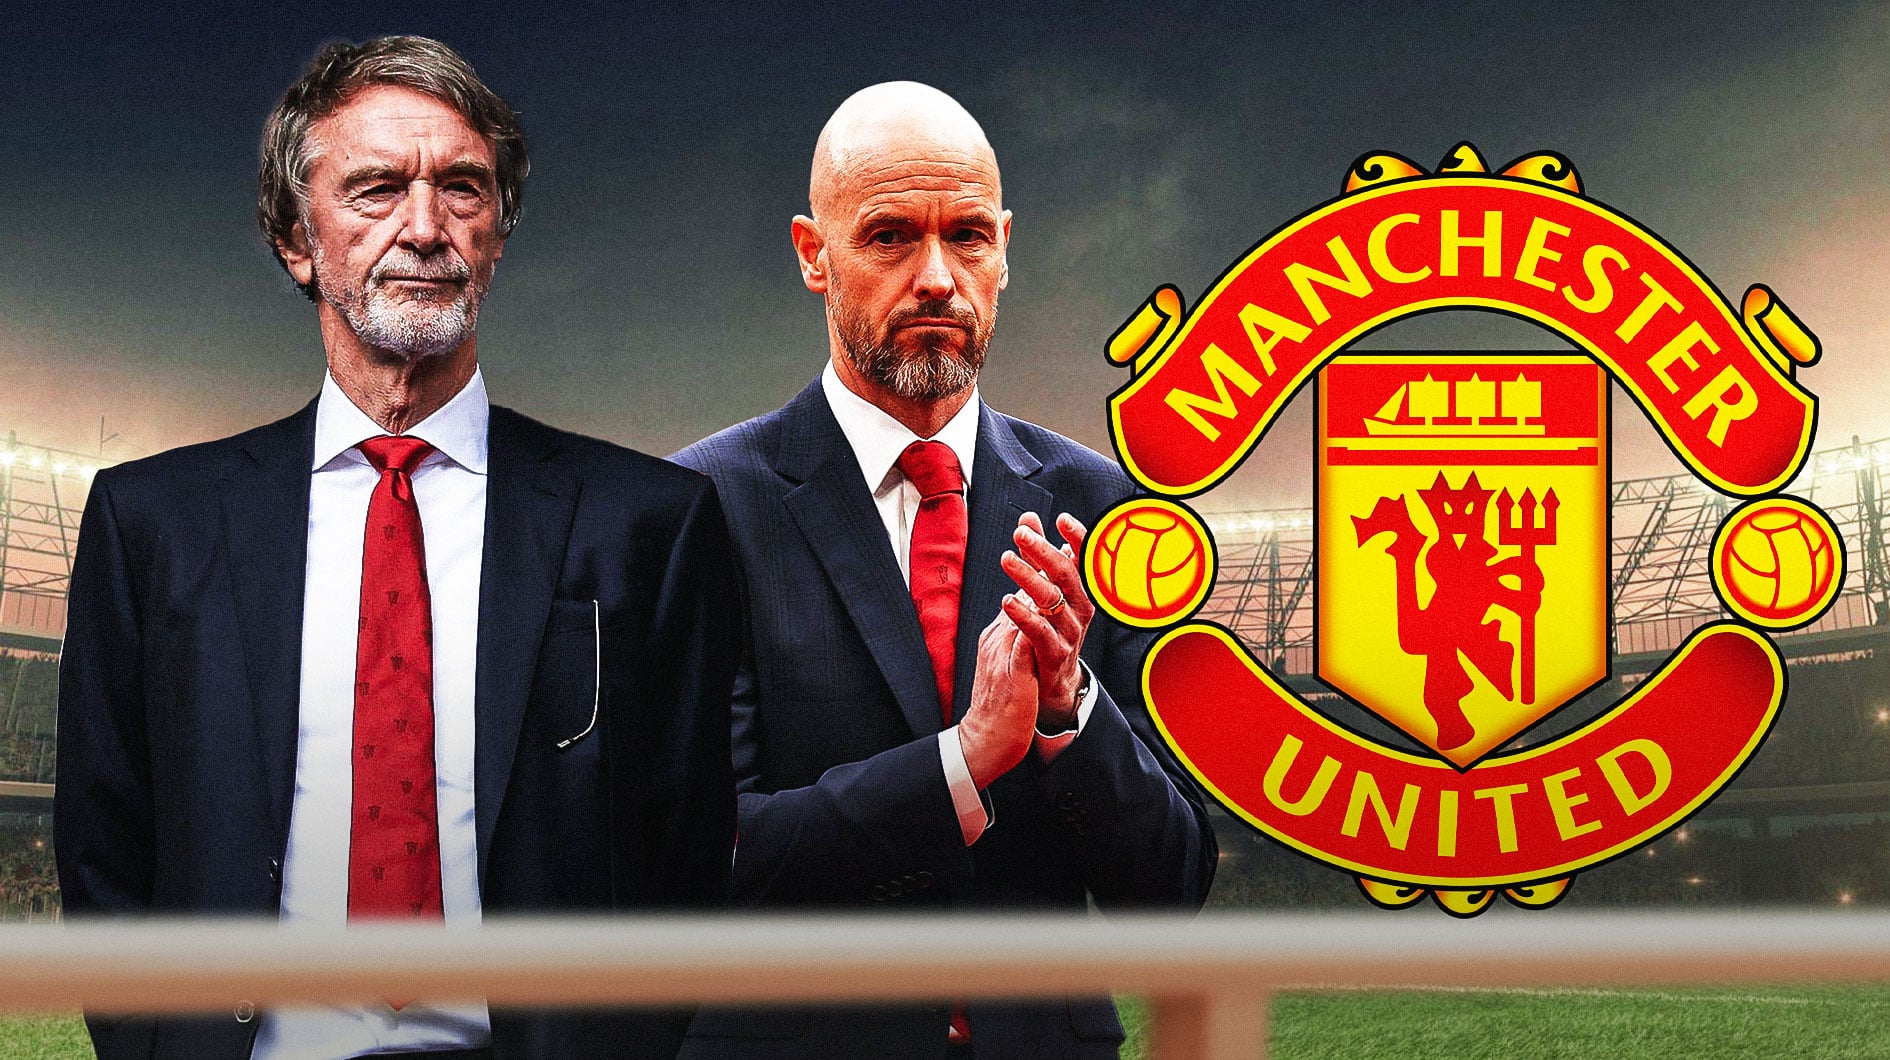 Manchester United officially decide the fate of Erik ten Hag